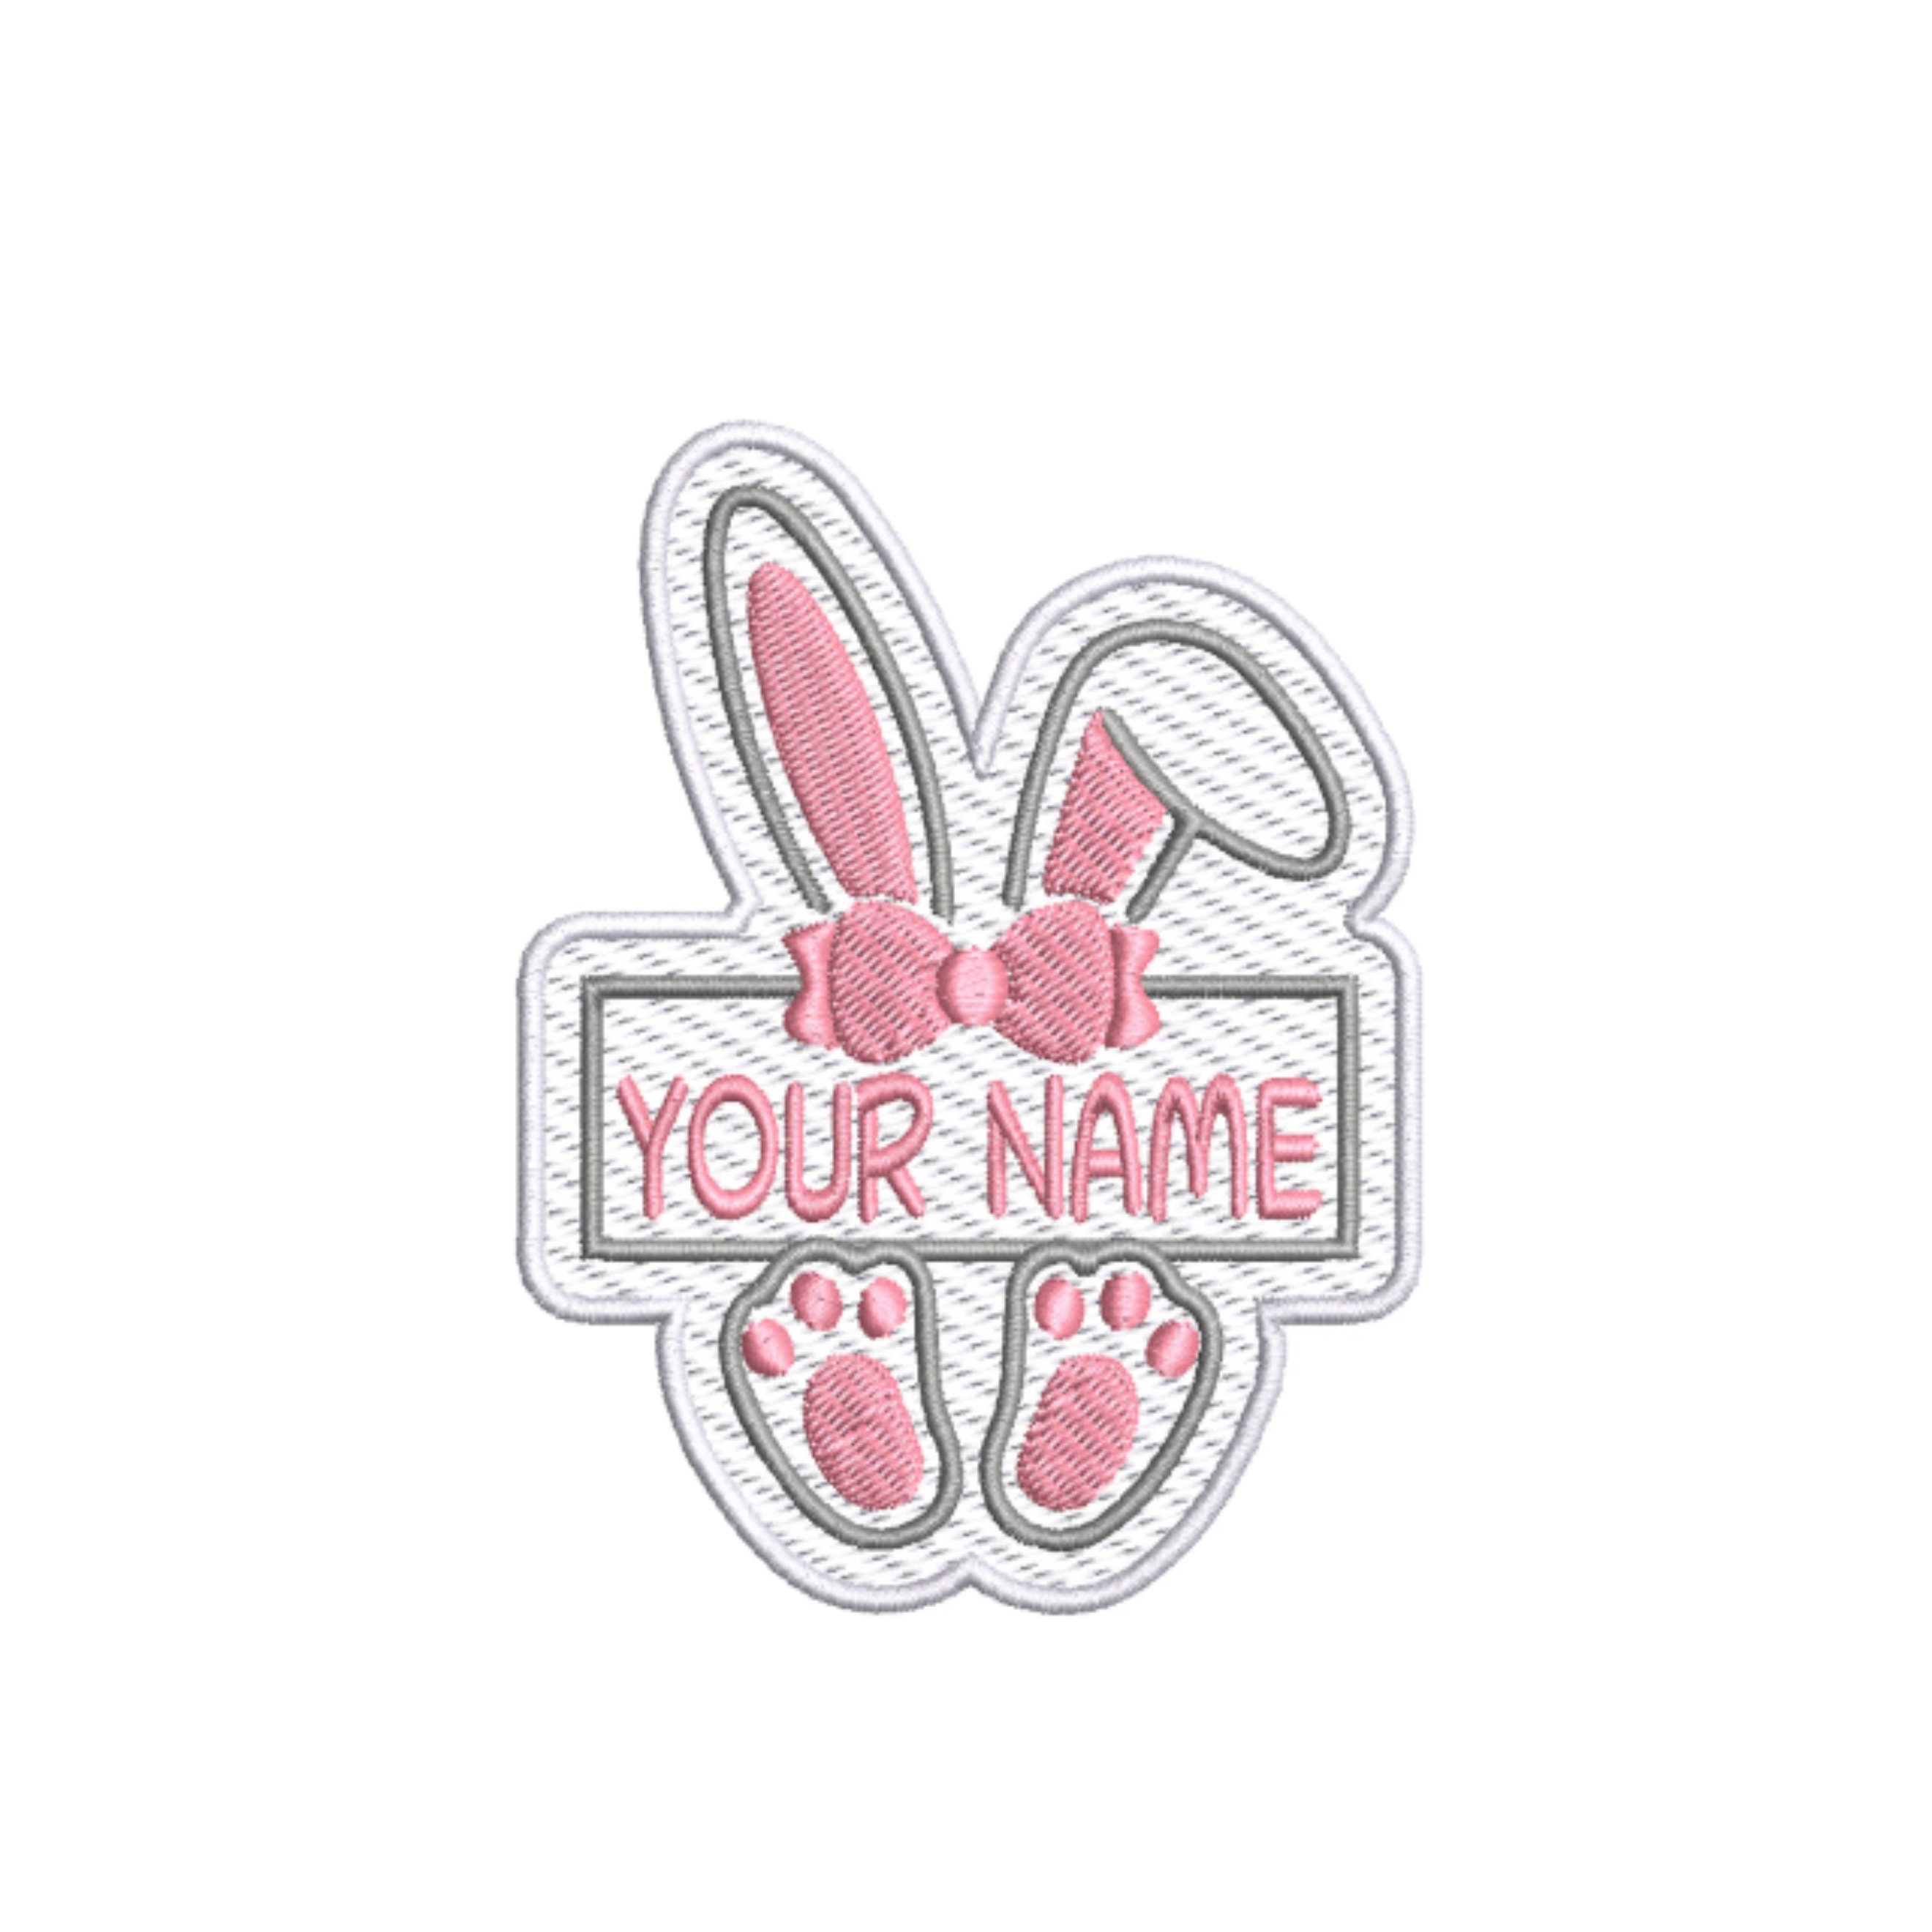 Energizer Bunny Ears Embroidered Iron on Patch 3.75 X 